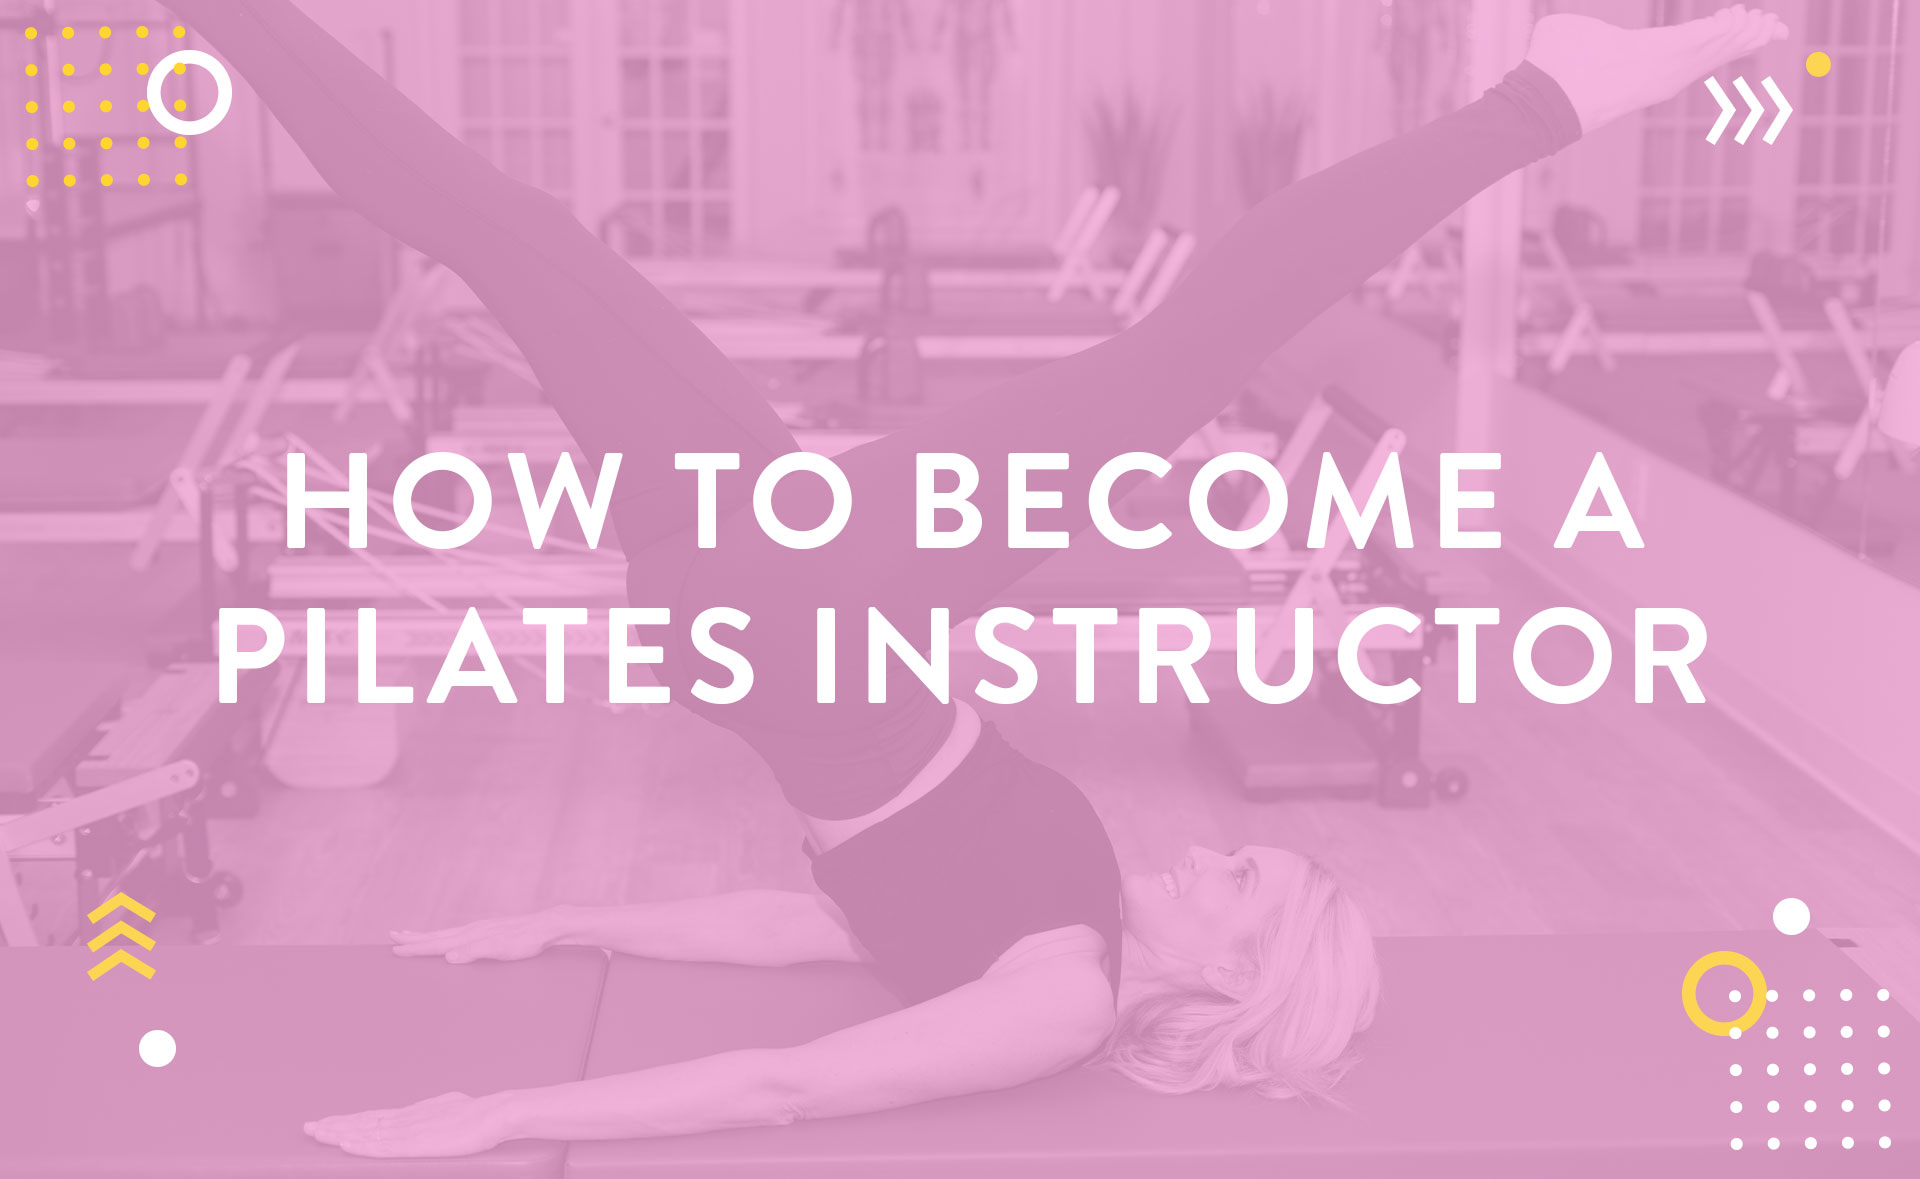 how to become a pilates instructor